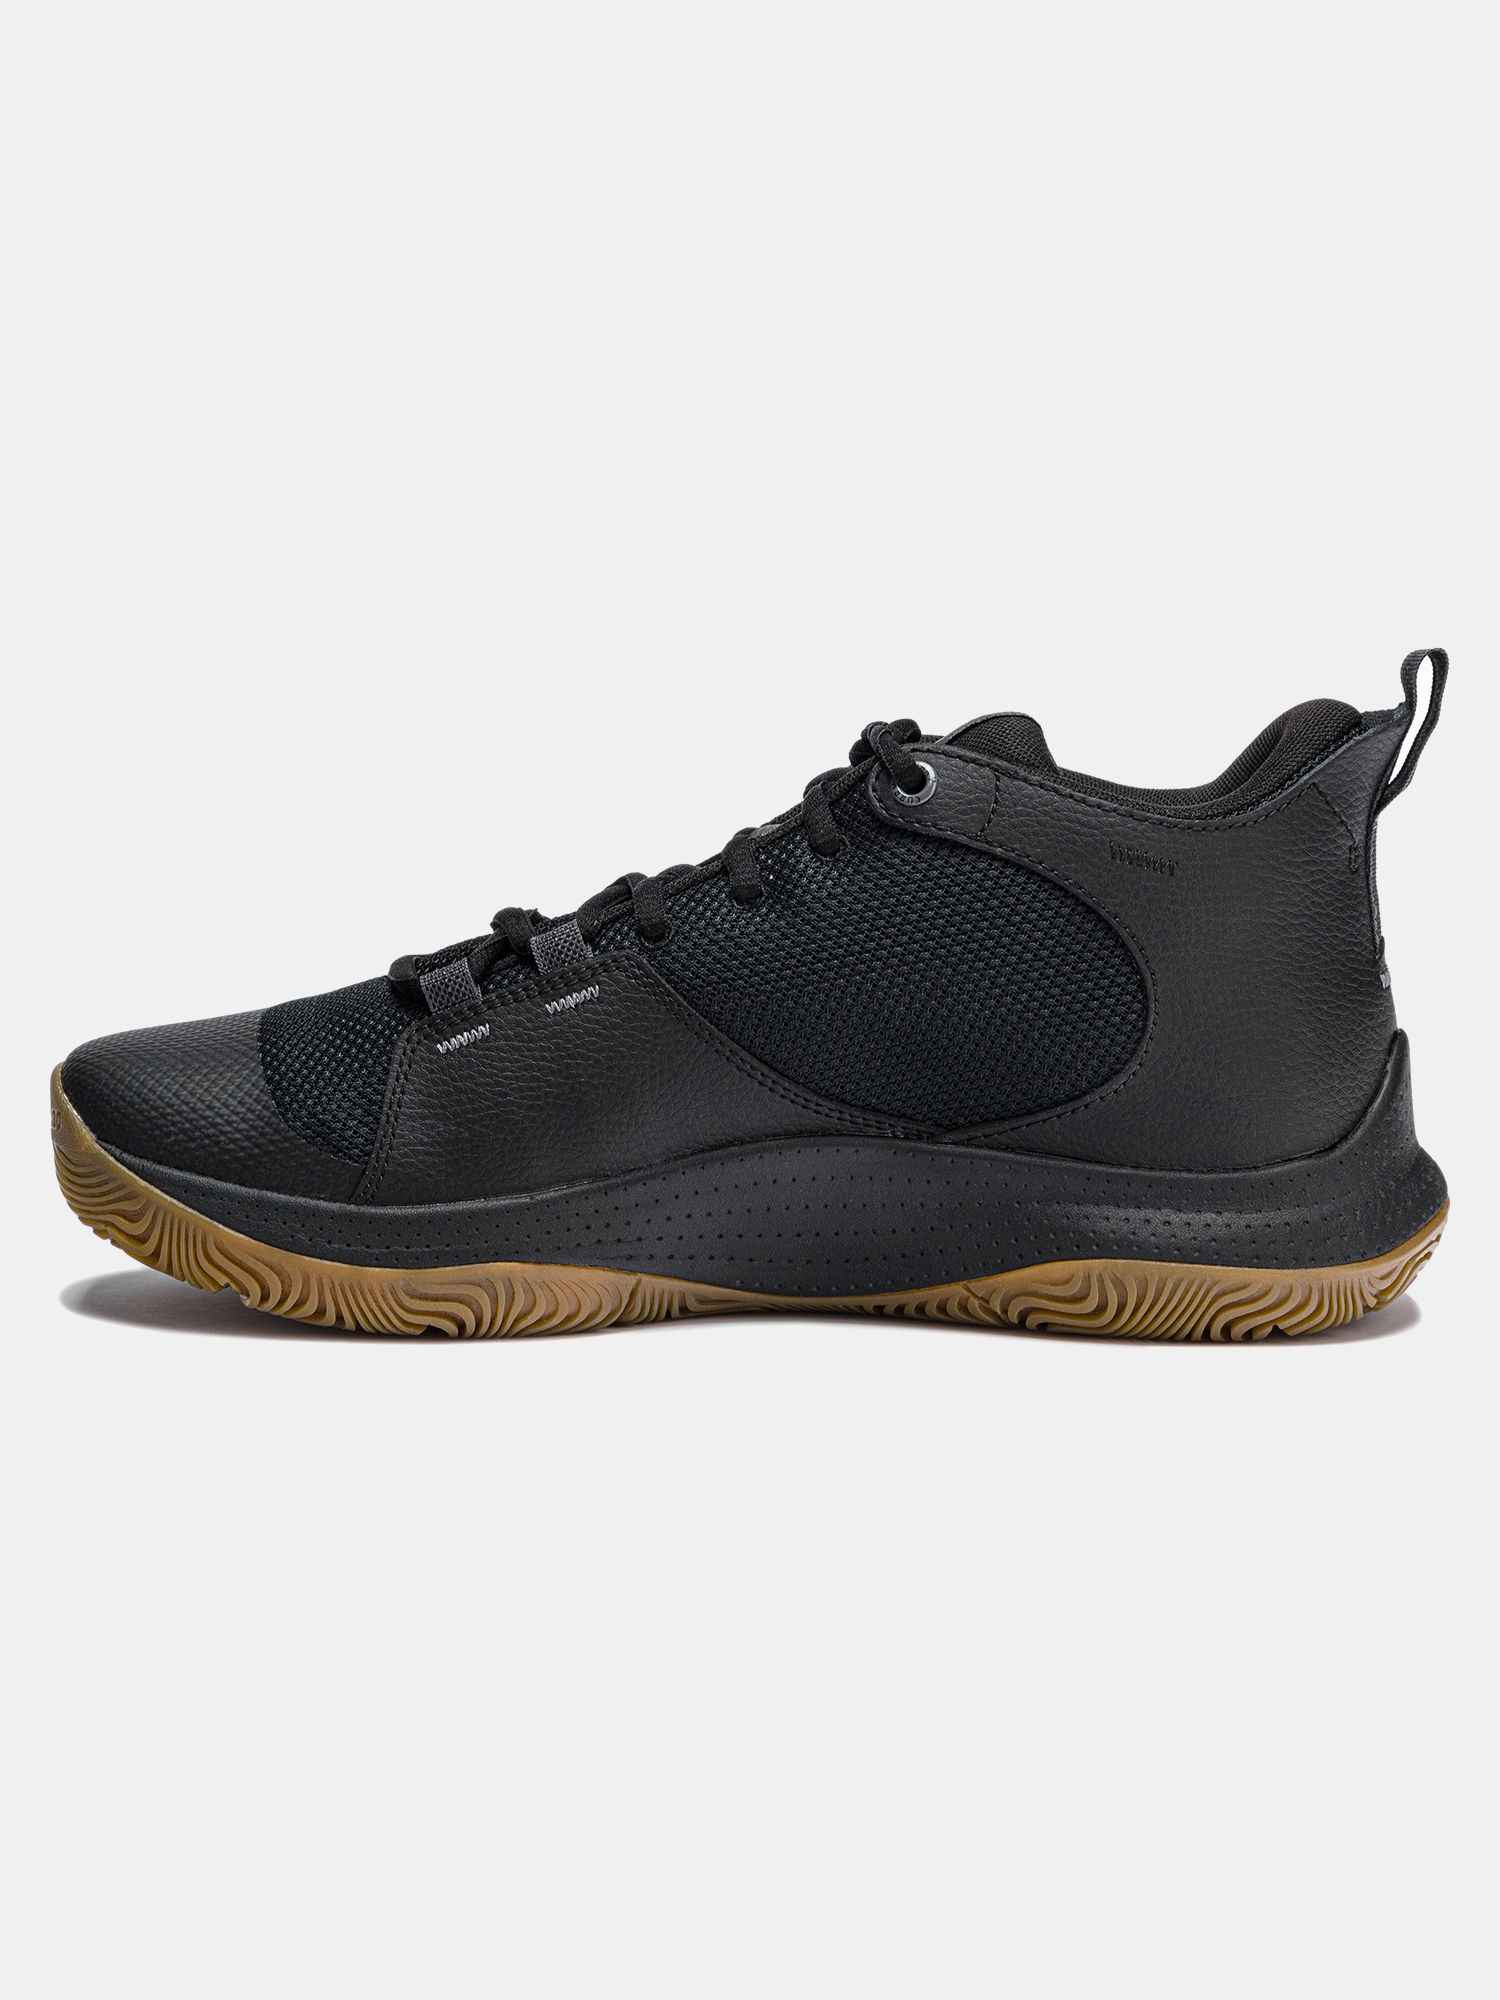 Boty Under Armour 3Z5-BLK (2)